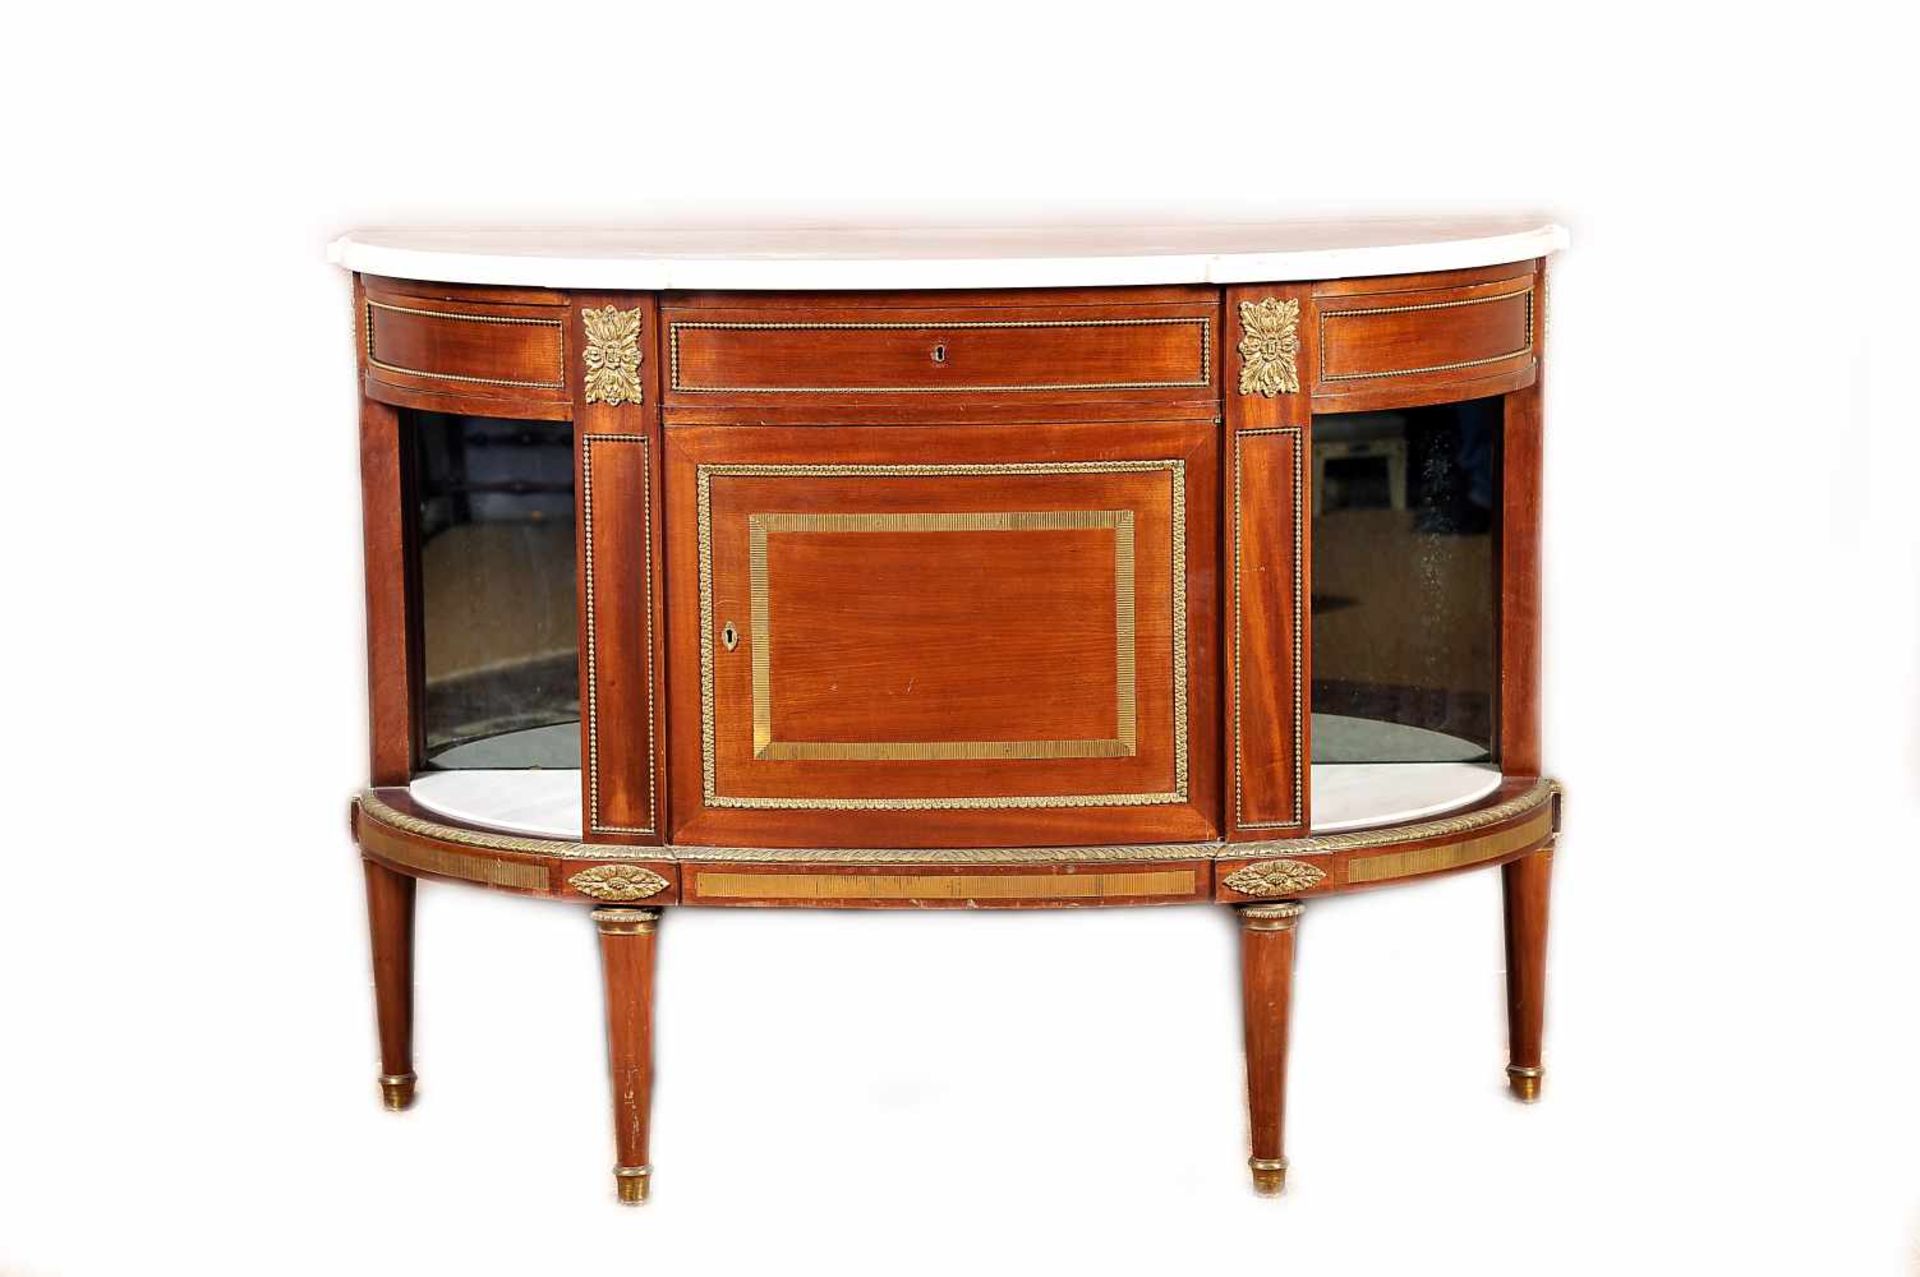 A Side Board, Louis XVI style, mahogany, gilt bronze mounts and applications, mirrored